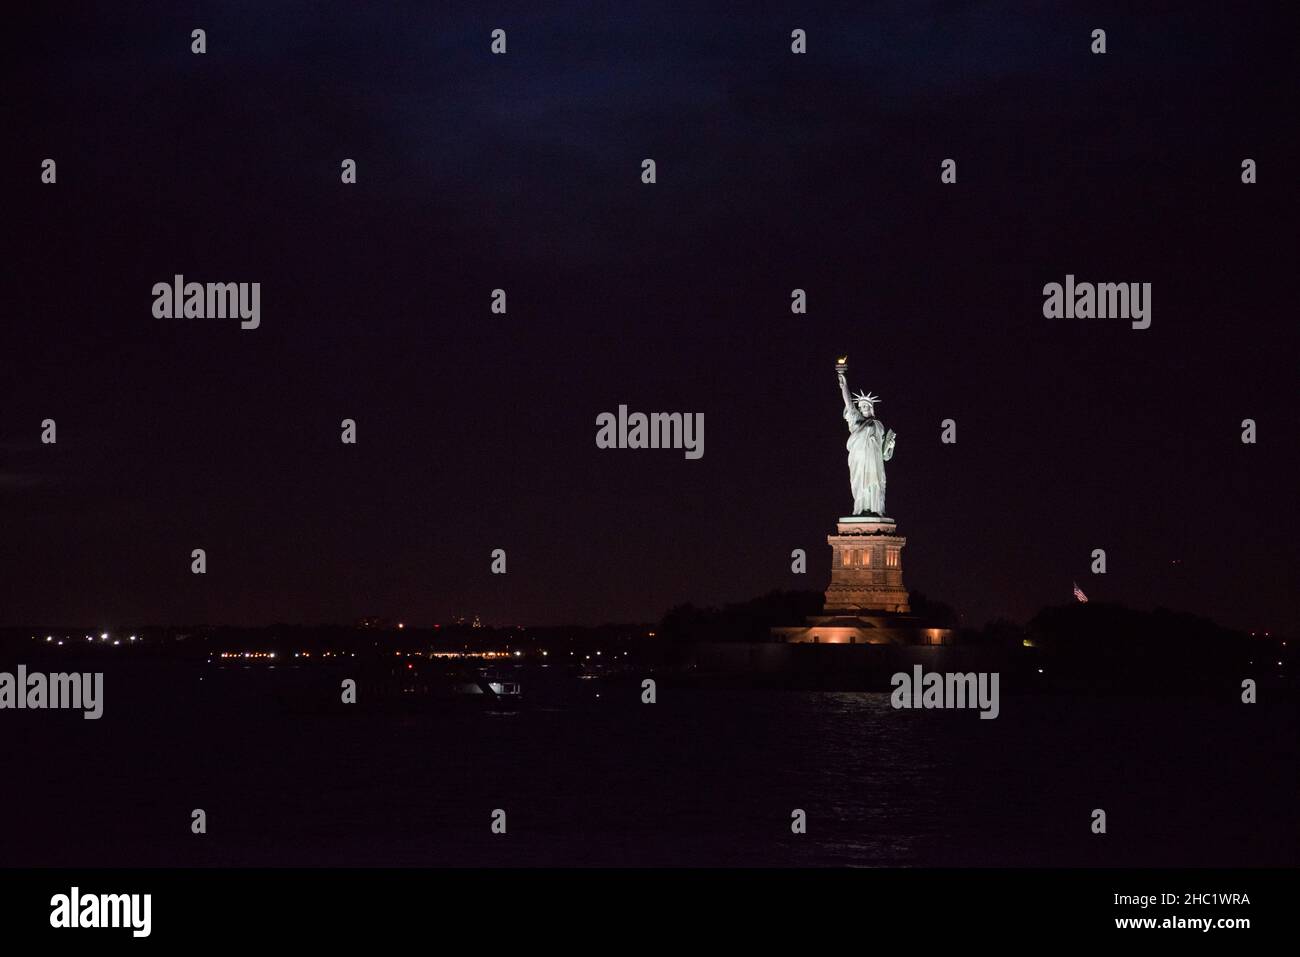 Iconic Statue of Liberty in New York City at night, USA Stock Photo